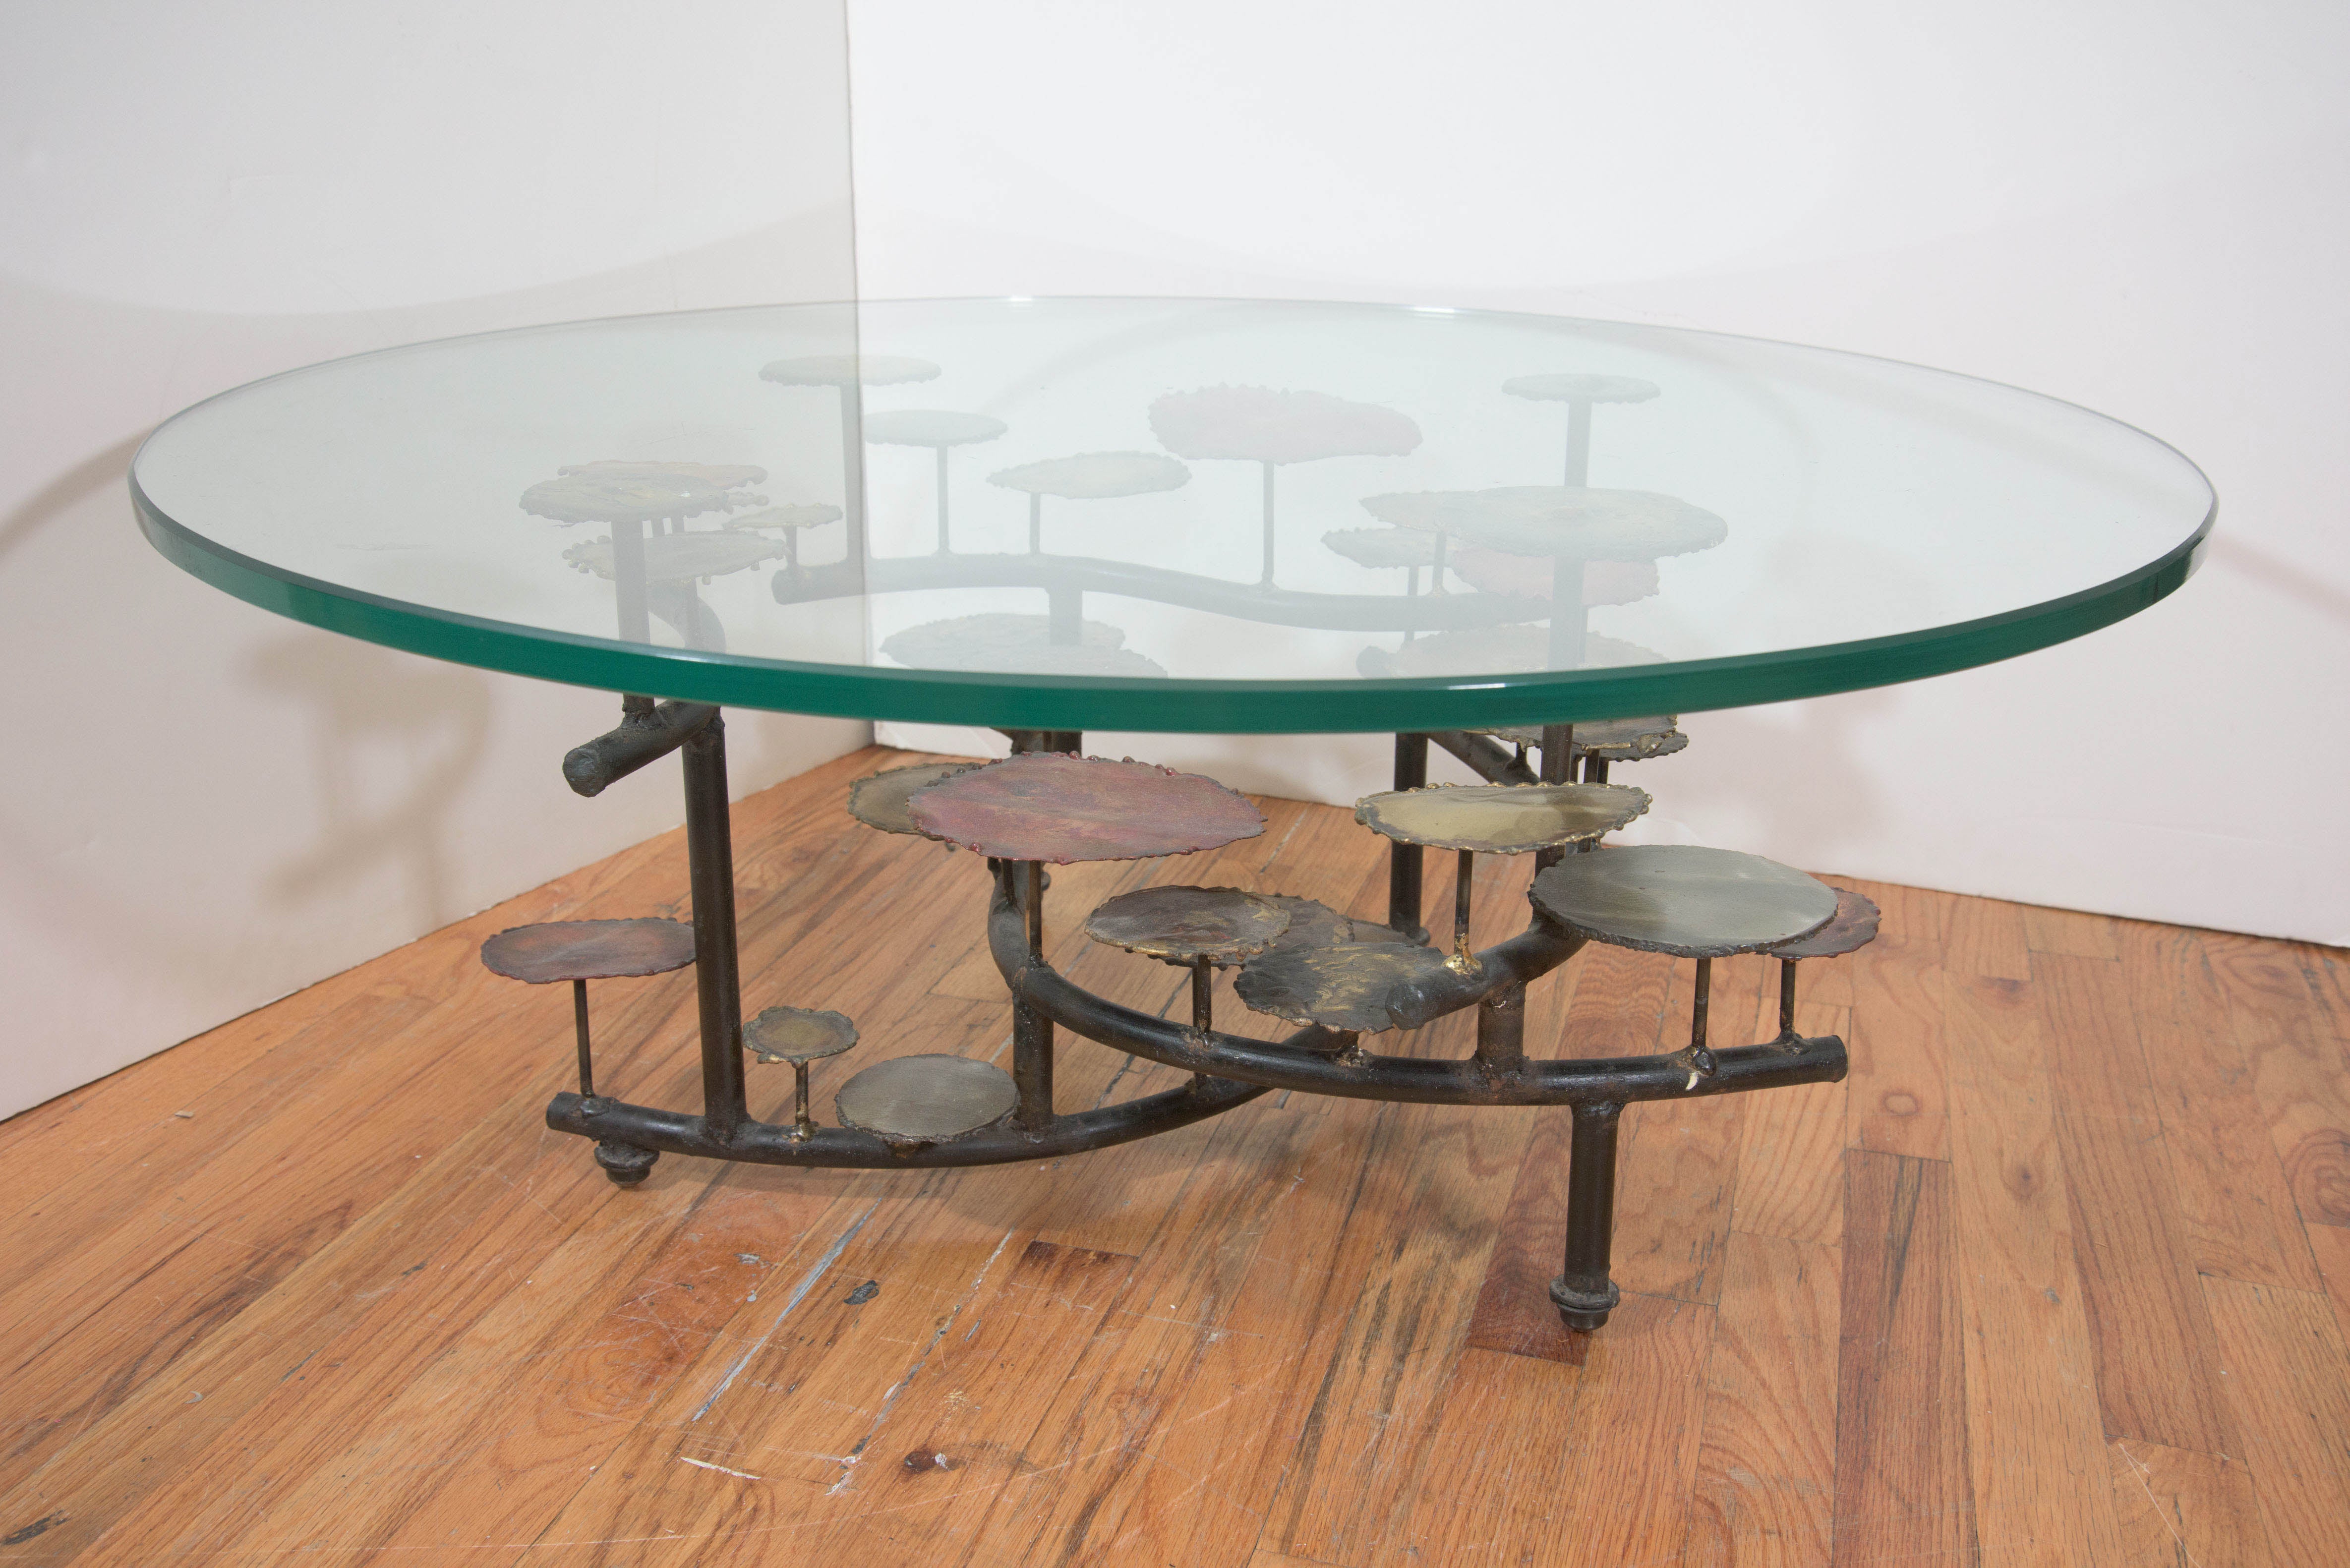 Silas Seandel Mixed Metal Lily Pad Coffee Table with Round Glass Top